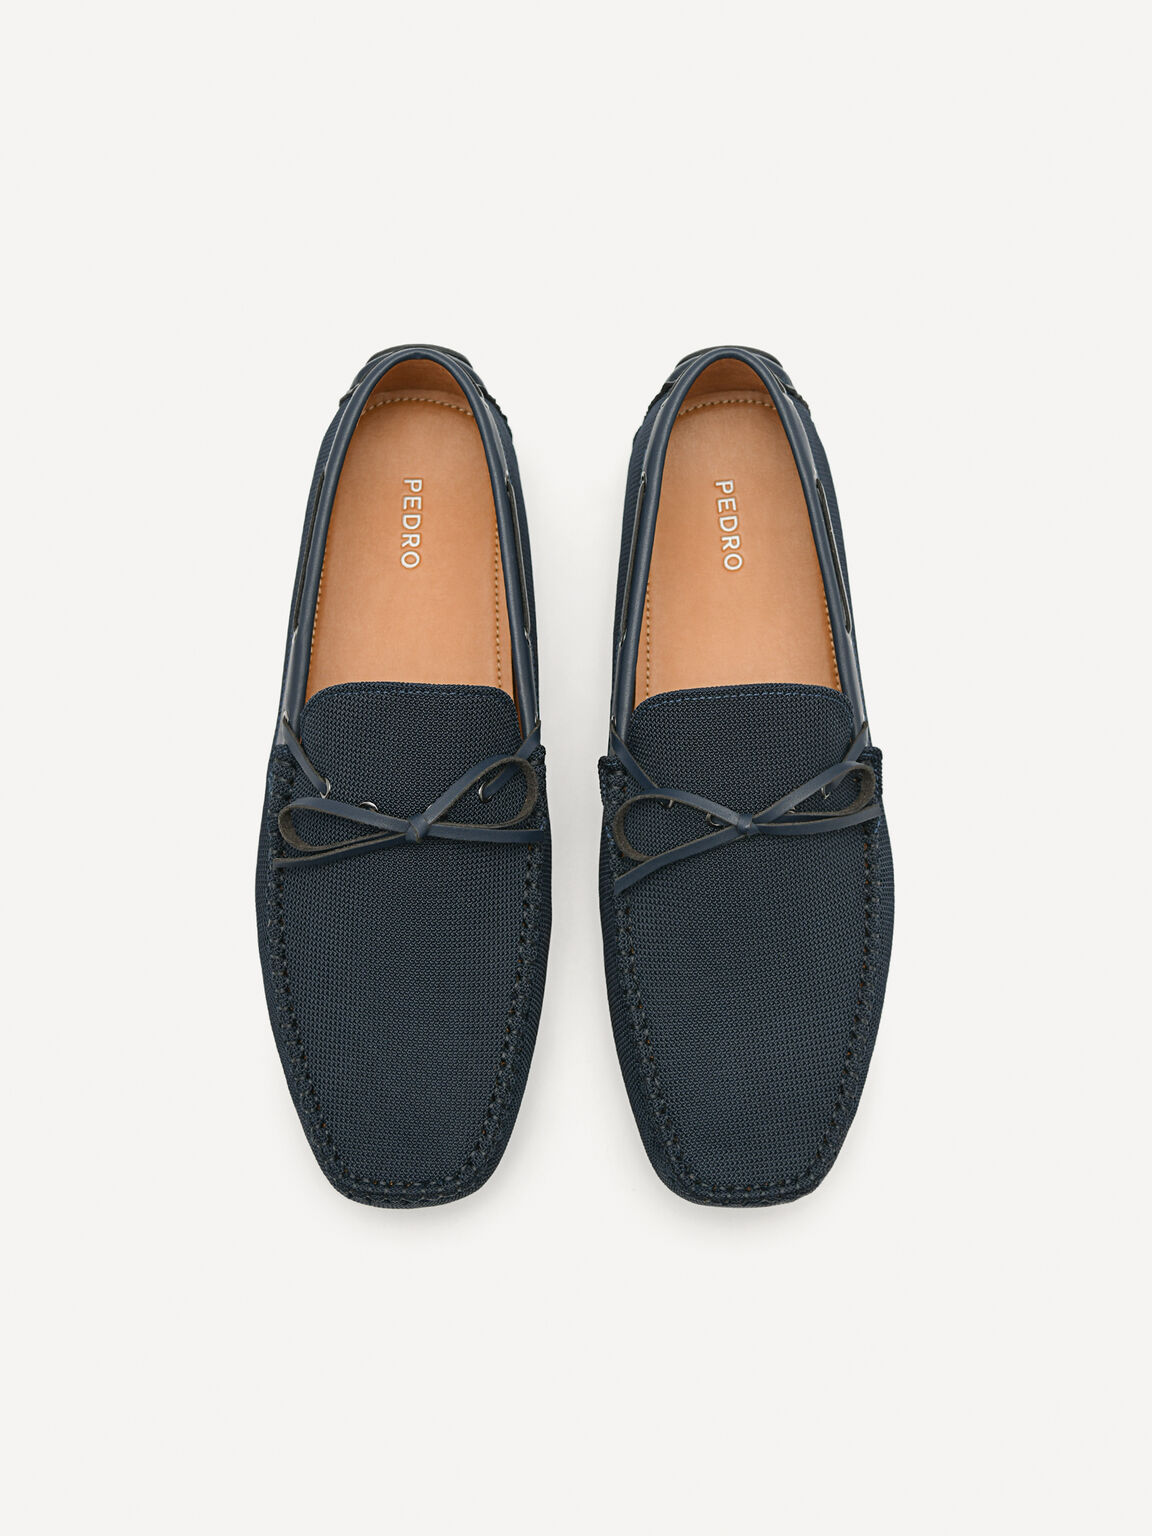 Michael Bow Moccasins, Navy